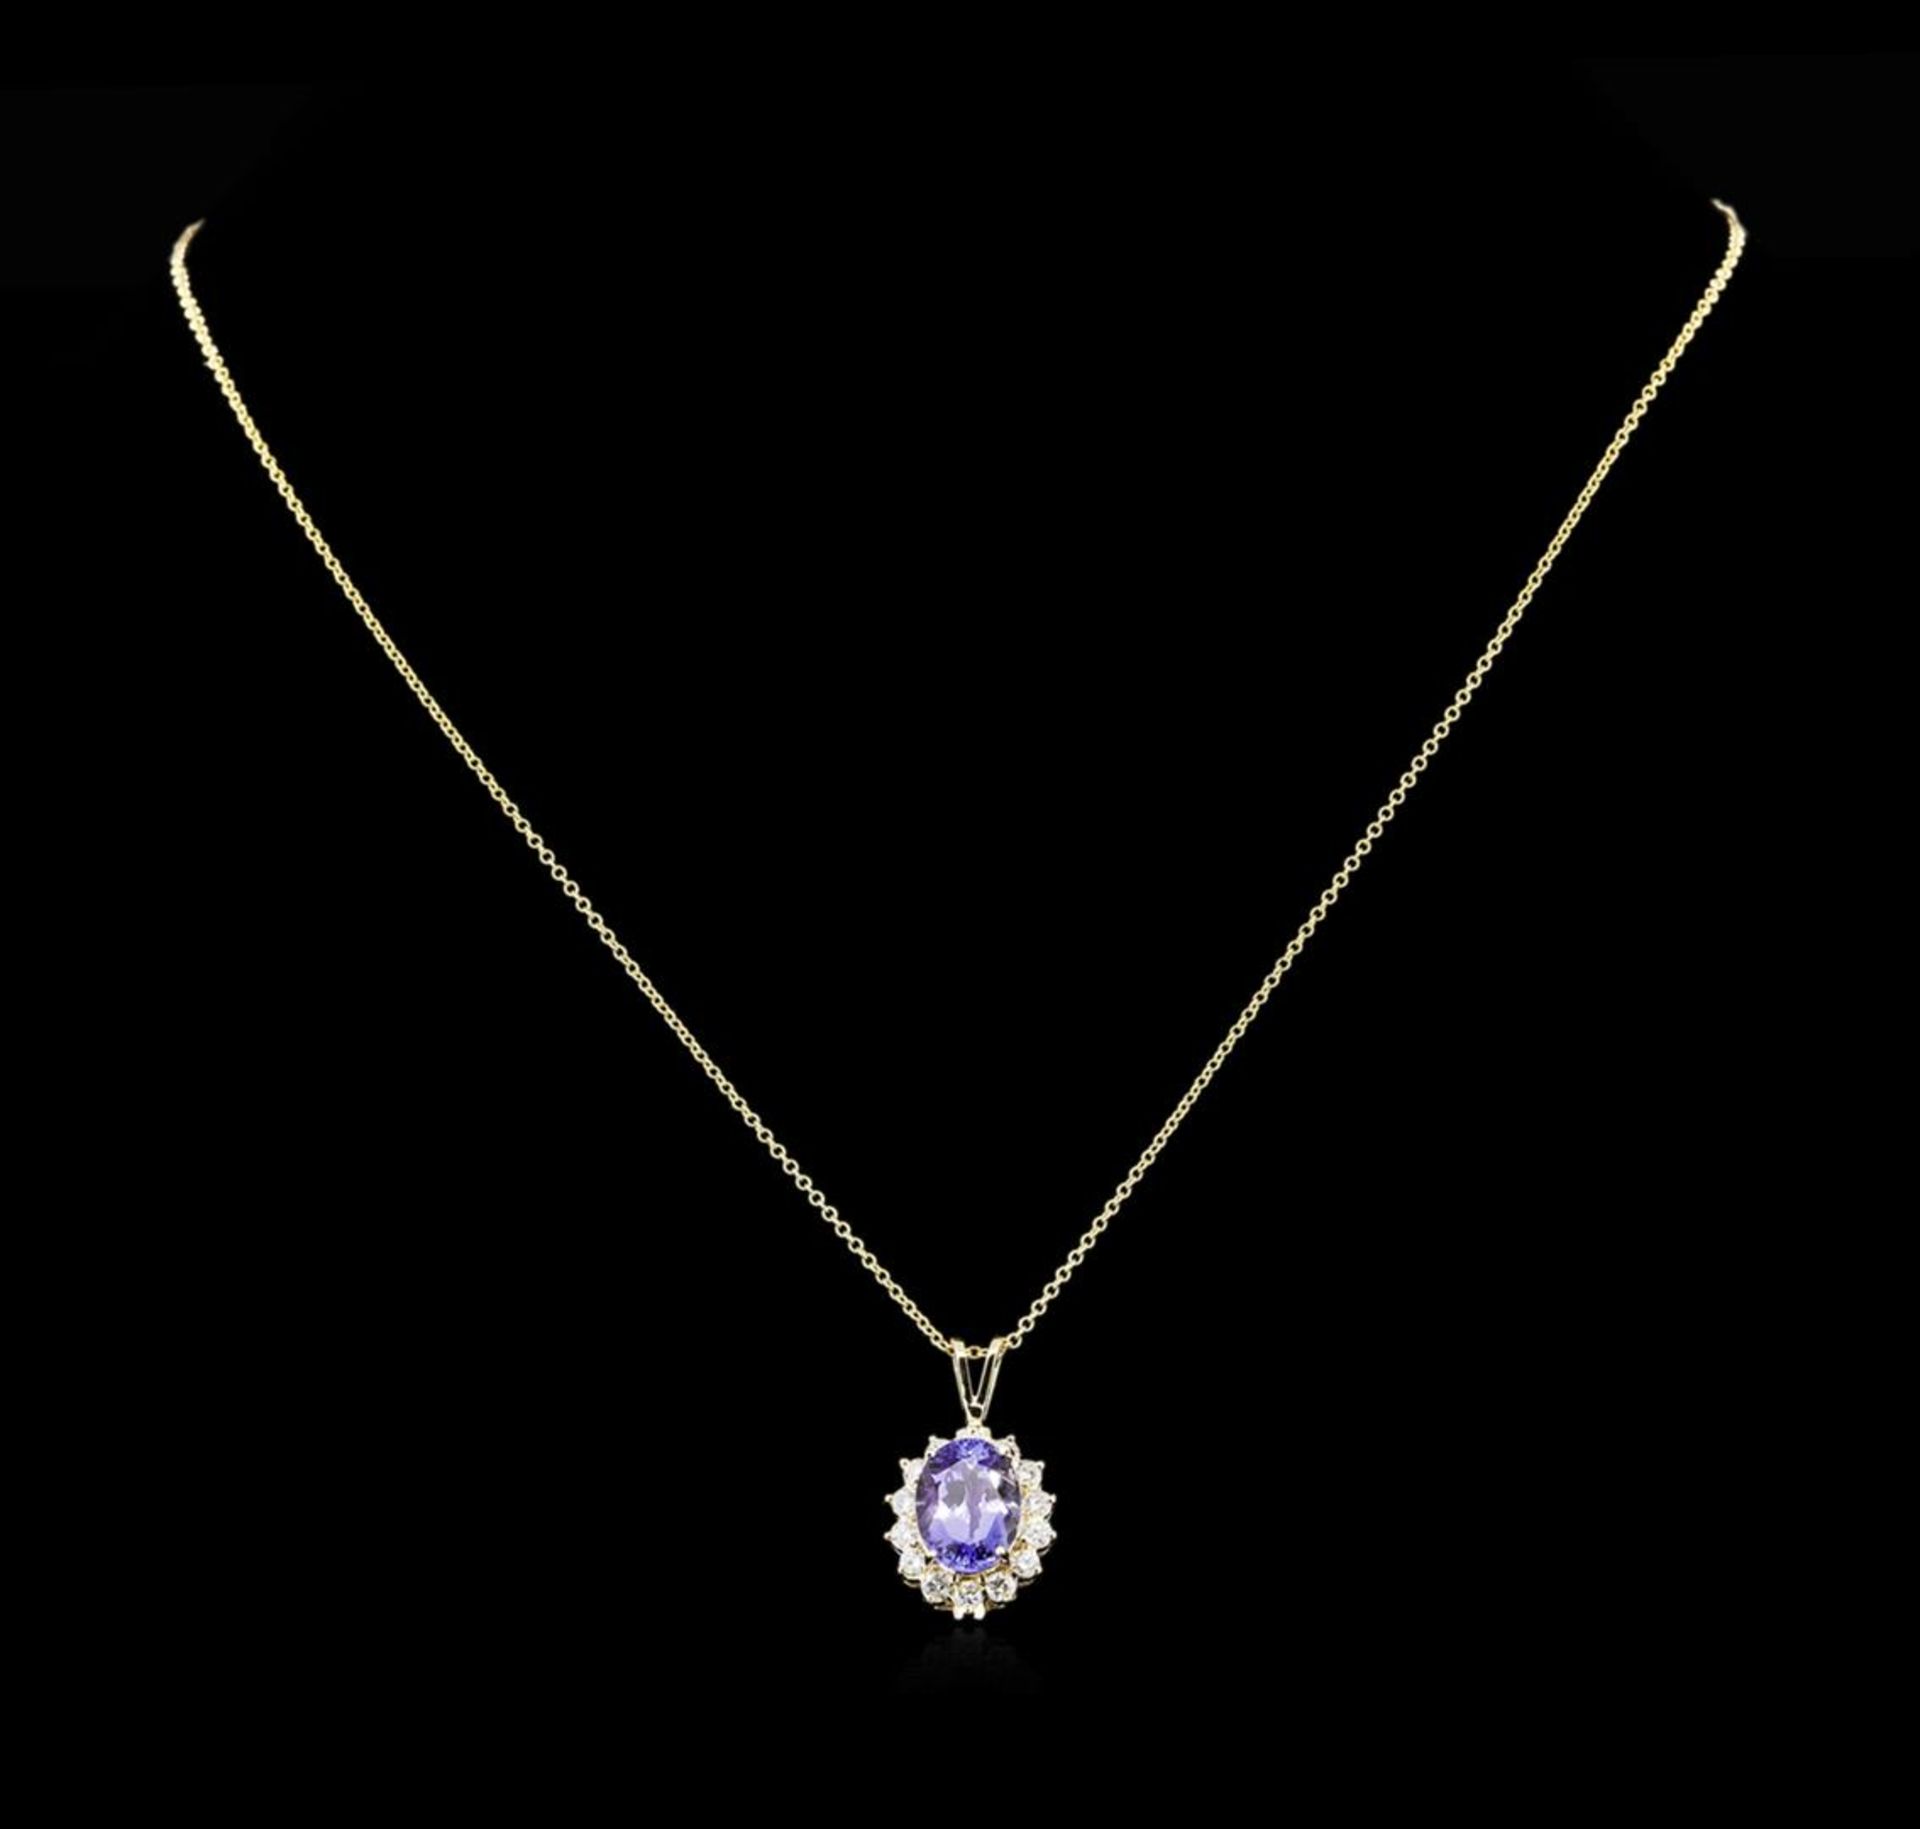 3.88 ctw Tanzanite and Diamond Pendant With Chain - 14KT Yellow Gold - Image 2 of 2